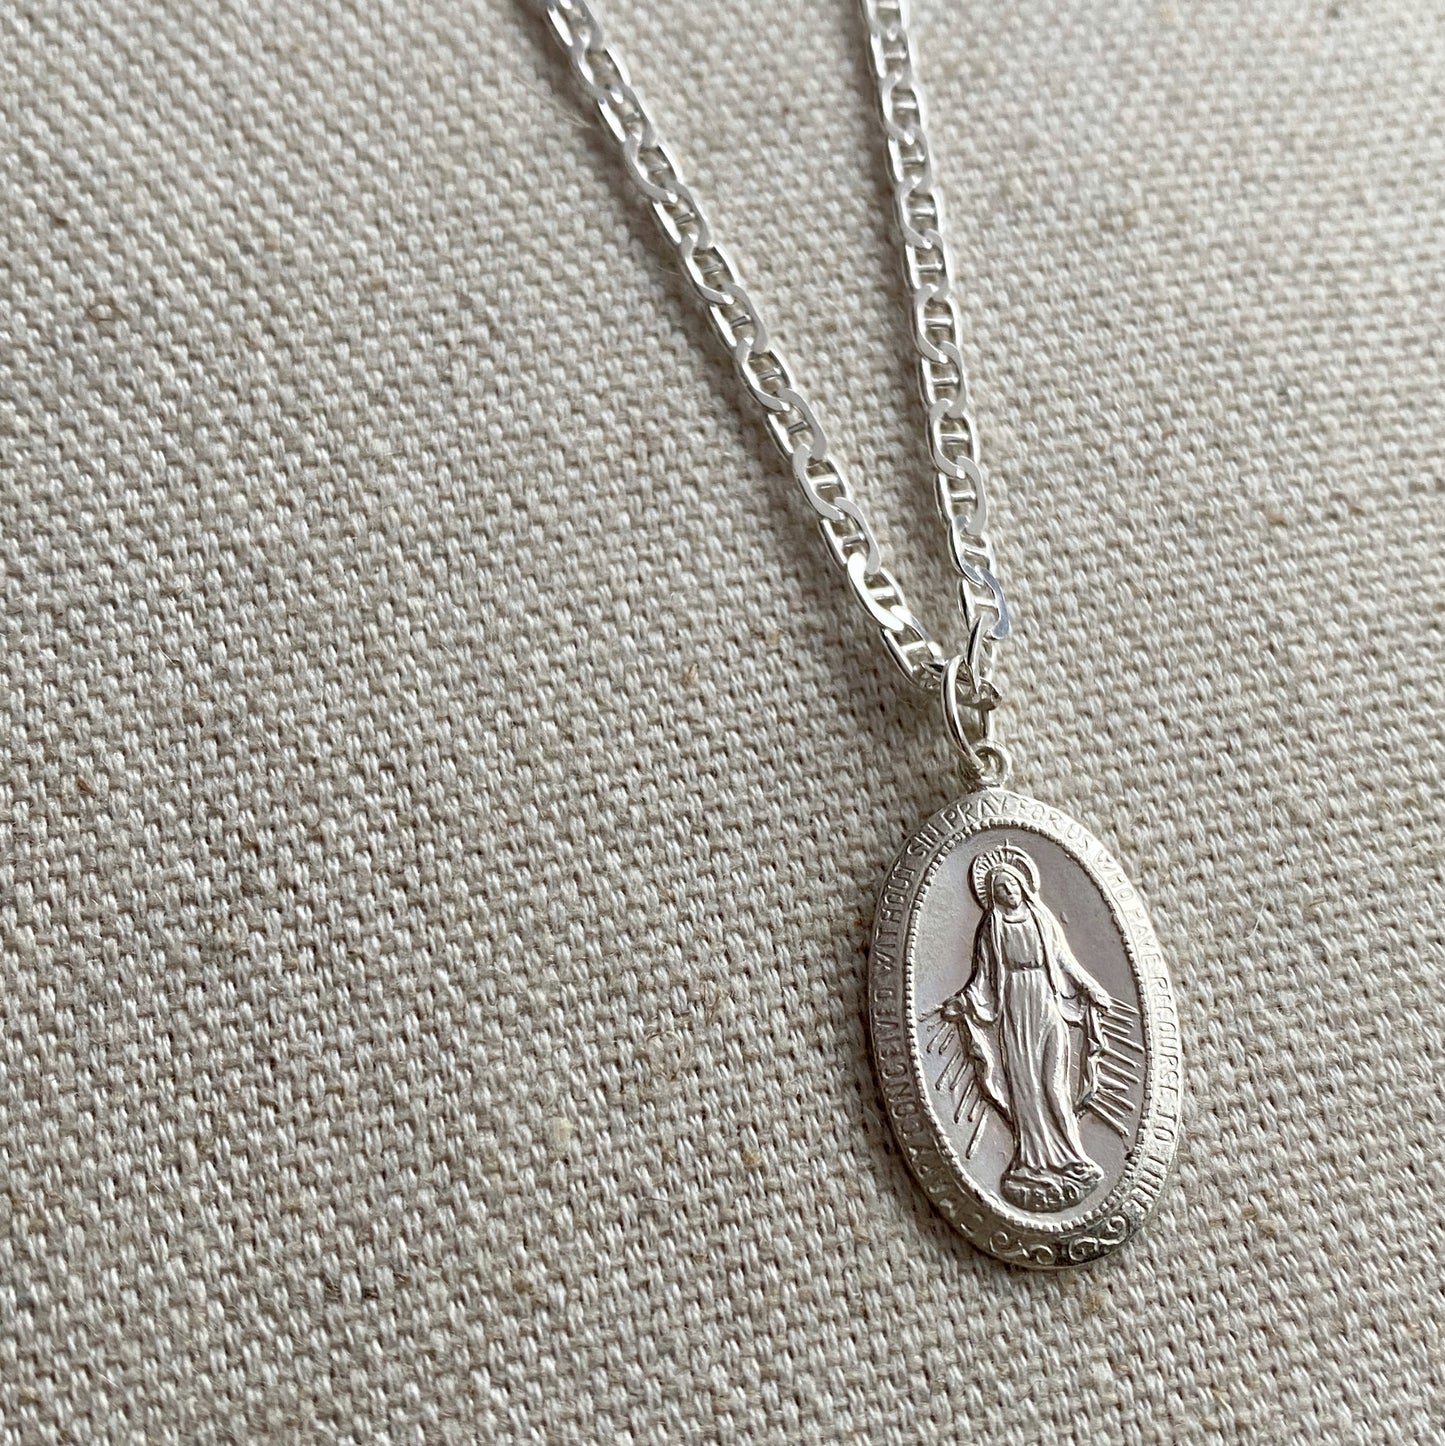 Miraculous Medal Blessed Mother Virgin Mary Silver Oval Necklace